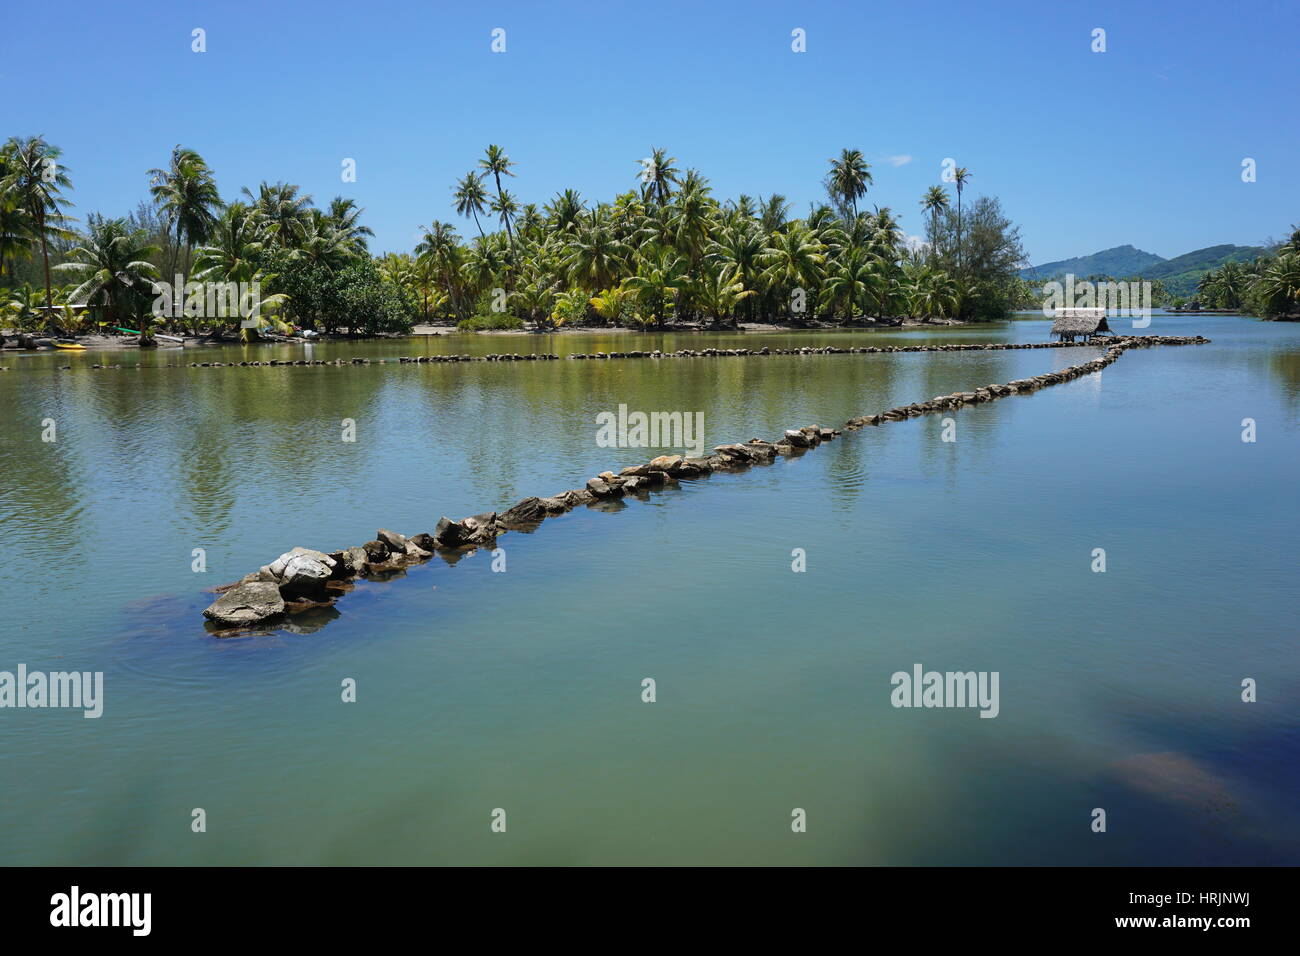 Traditional Polynesian old fish trap made with stones in a channel between a lake and the ocean, Huahine island, French Polynesia, South Pacific Stock Photo